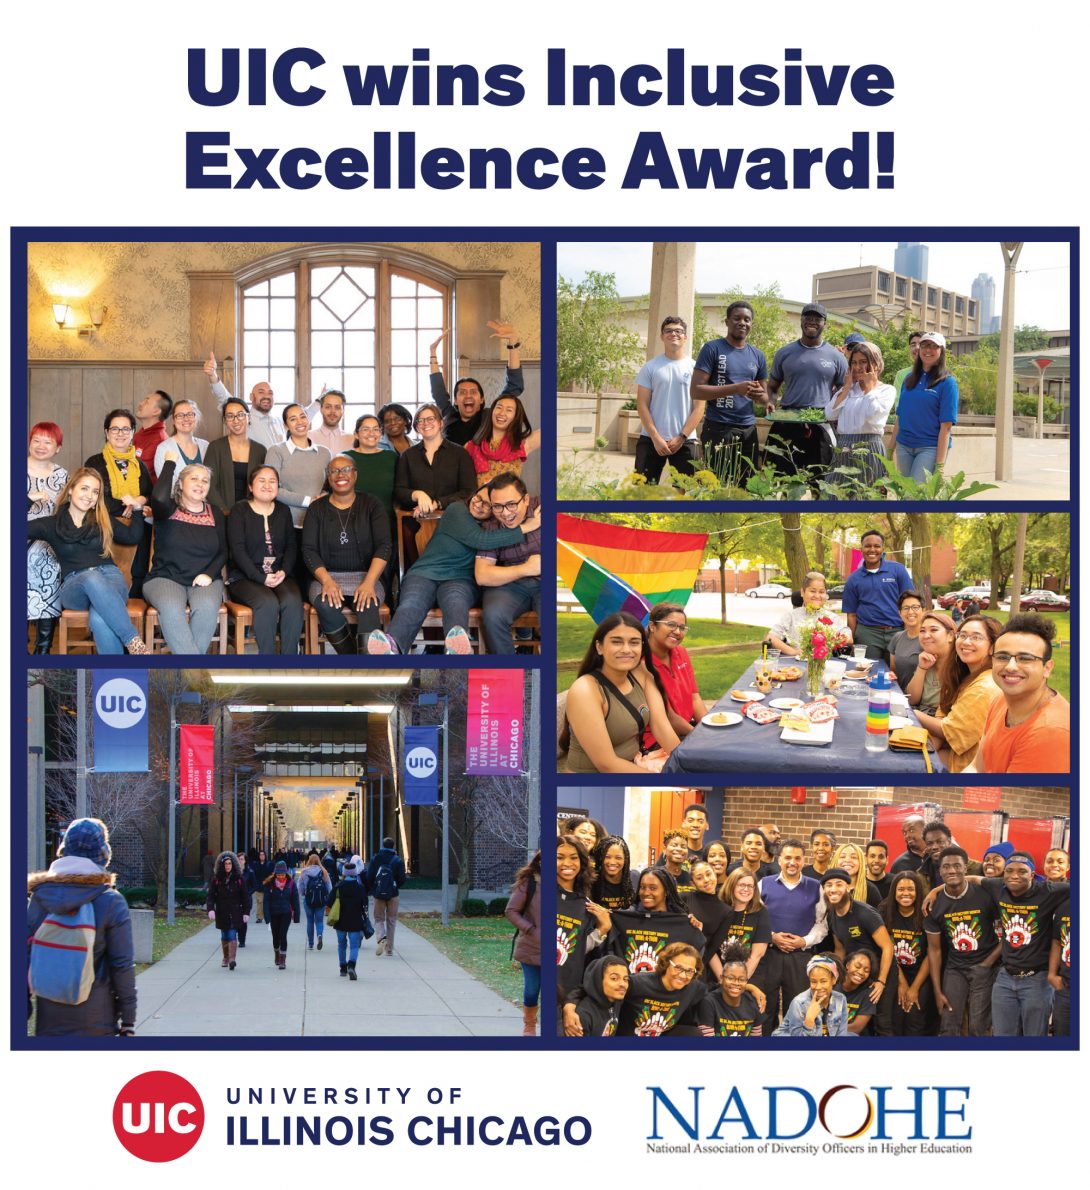 UIC wins Inclusive Excellence Award collage of campus groups